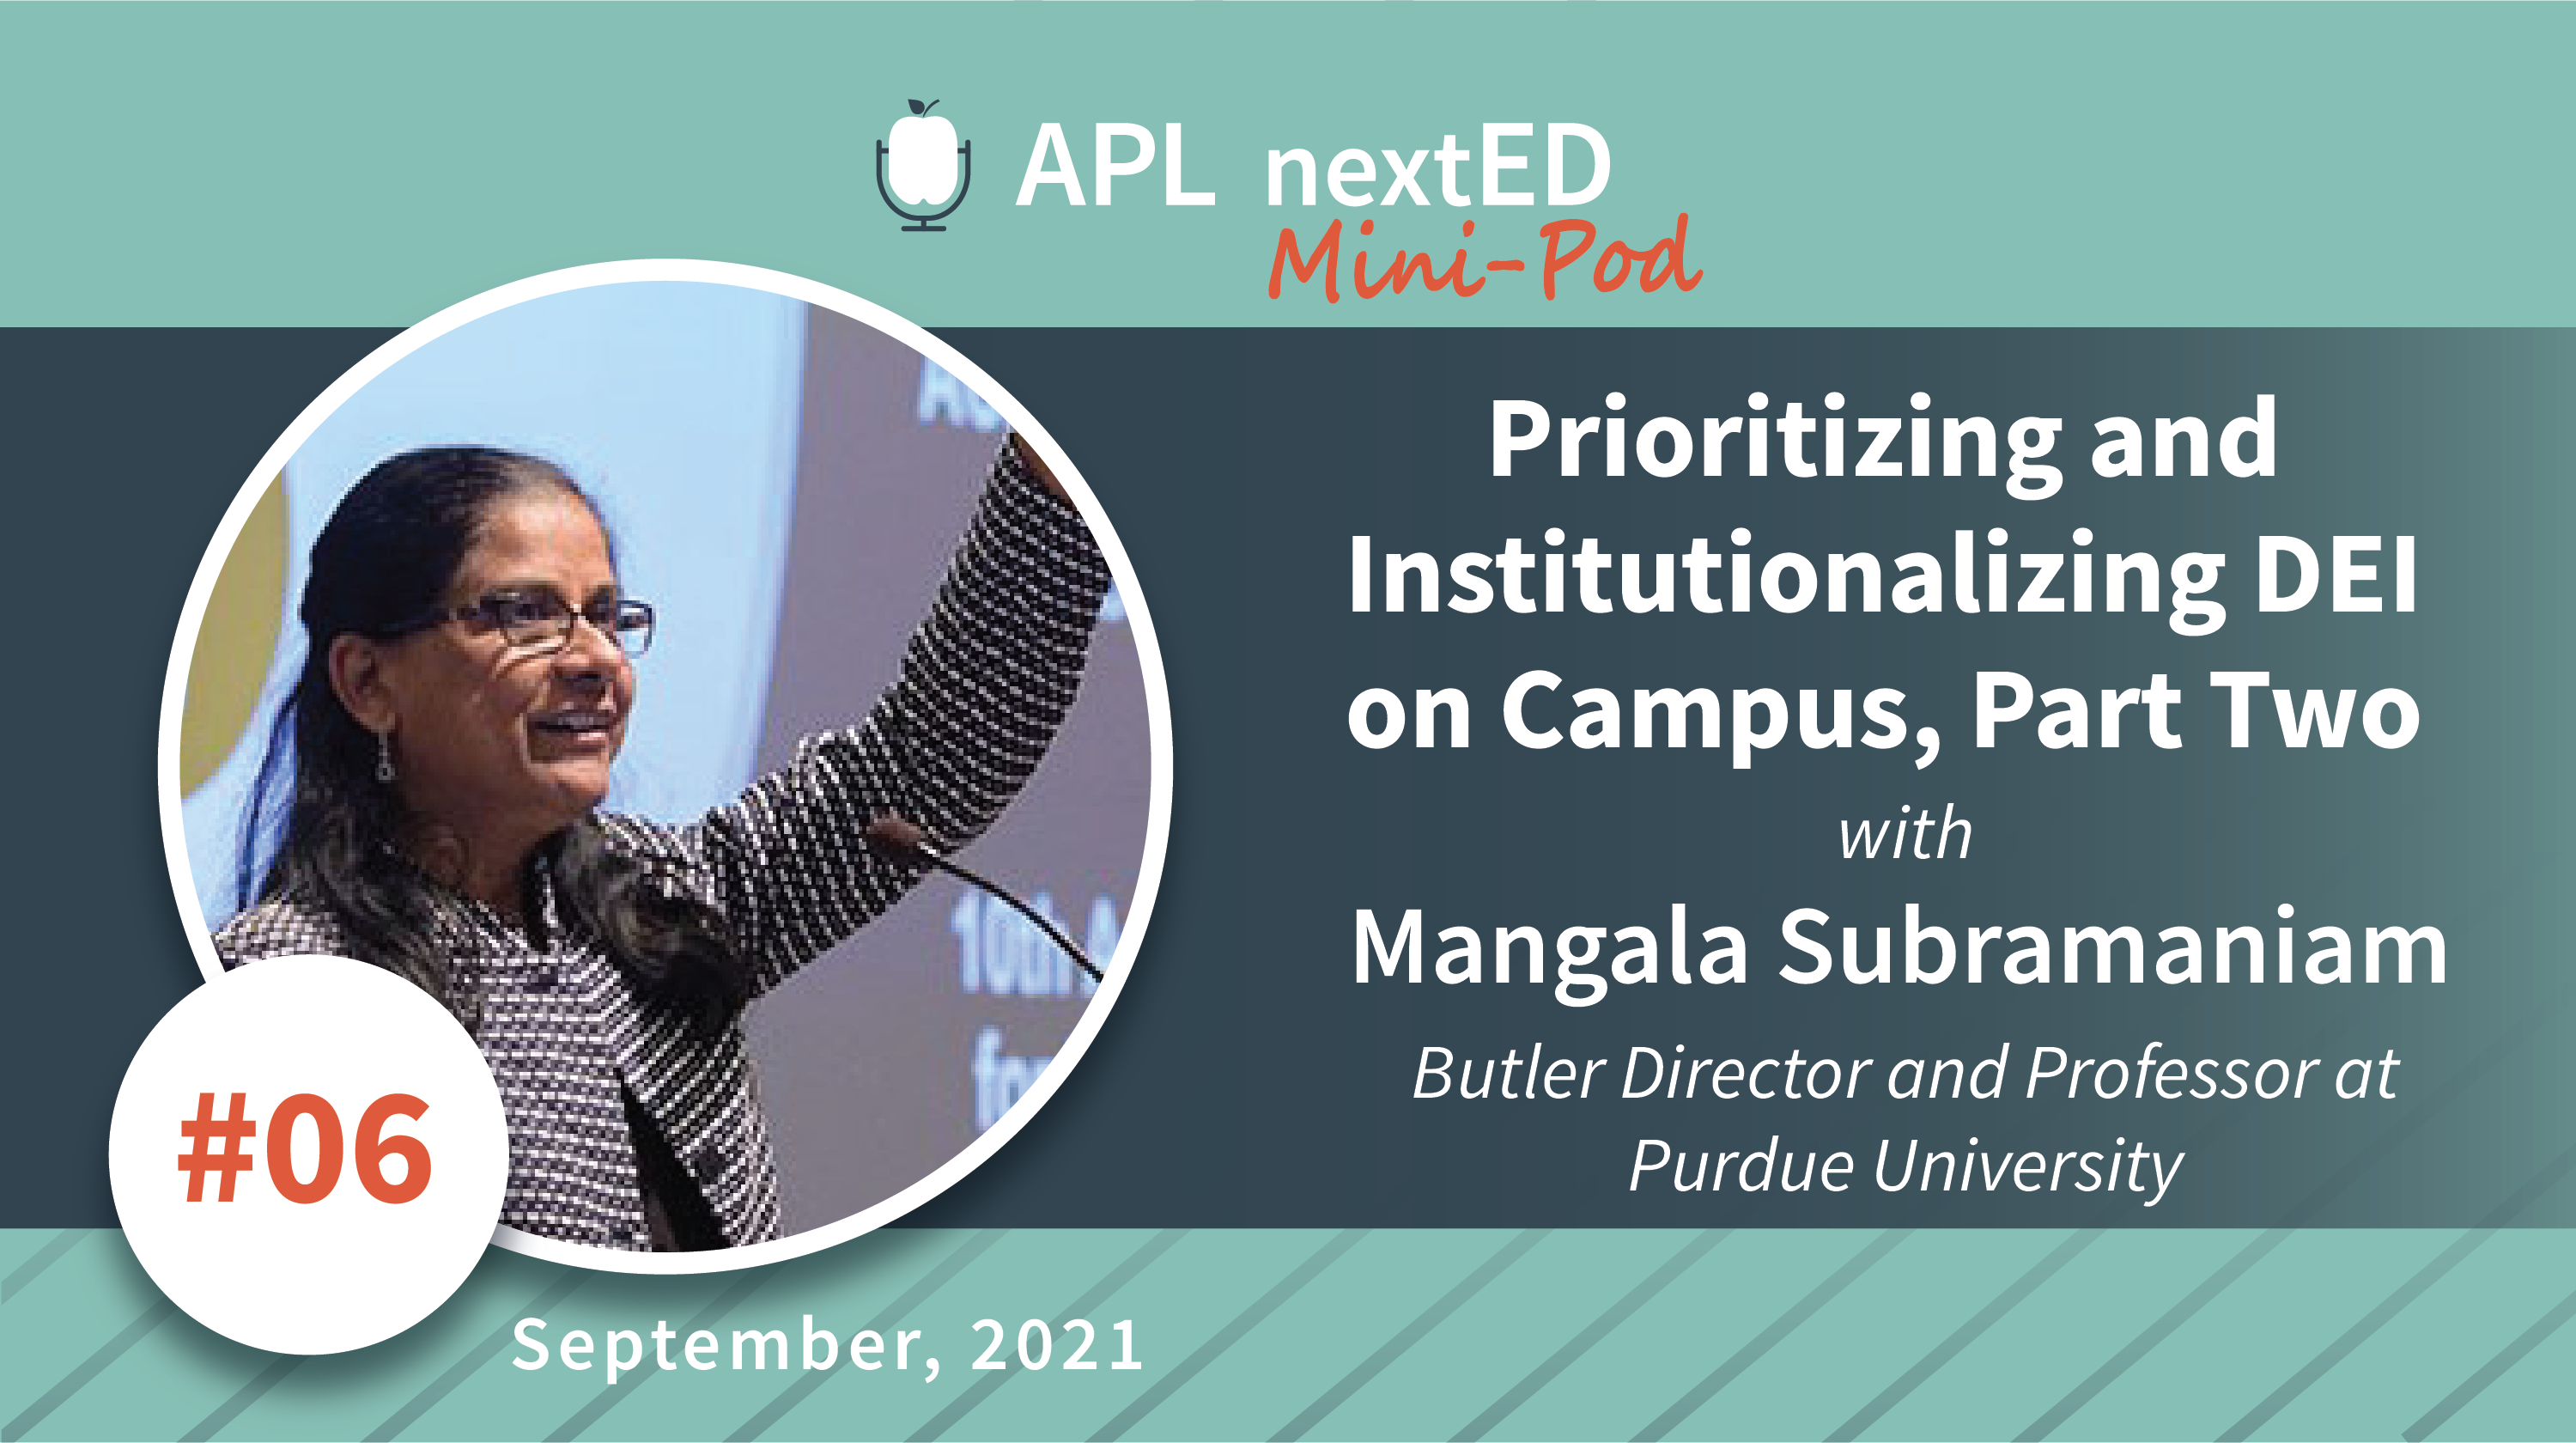 APL nextED Mini-Pod Episode 6: Prioritizing and Institutionalizing DEI on Campus with Dr. Mangala Subramaniam Part 2